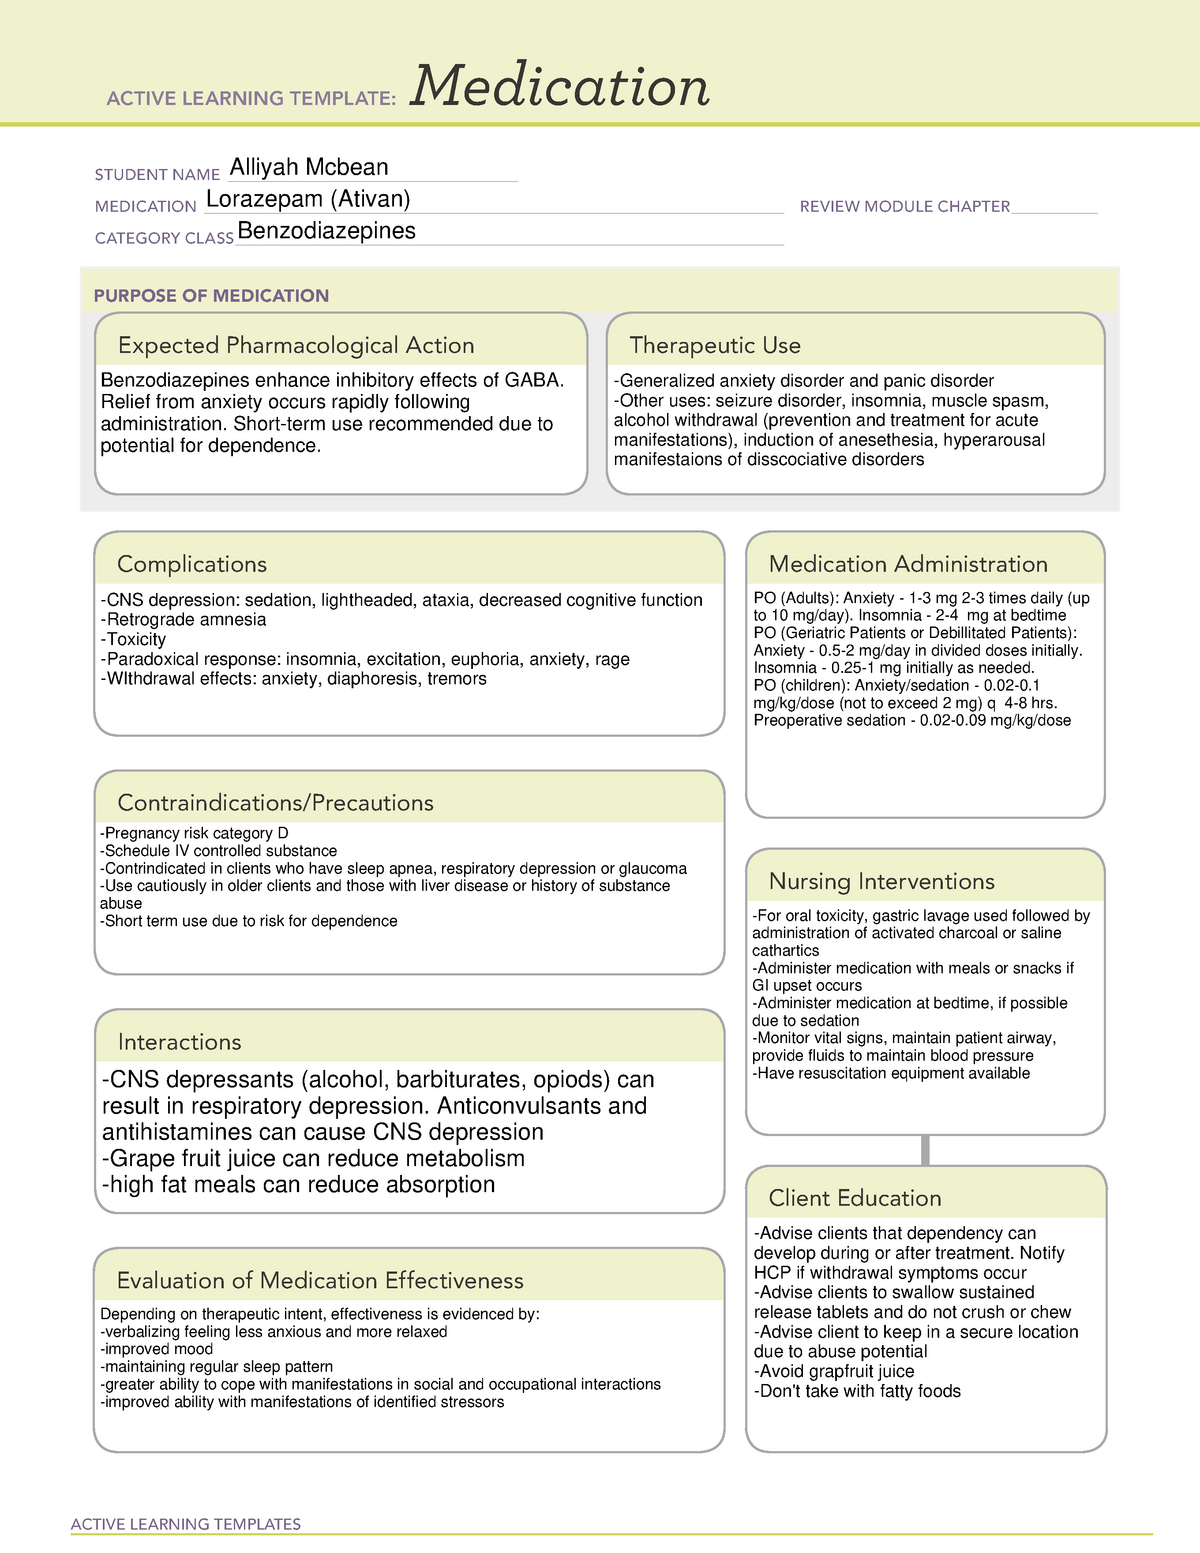 lorazepam-med-temp-ati-active-learning-templates-medication-student